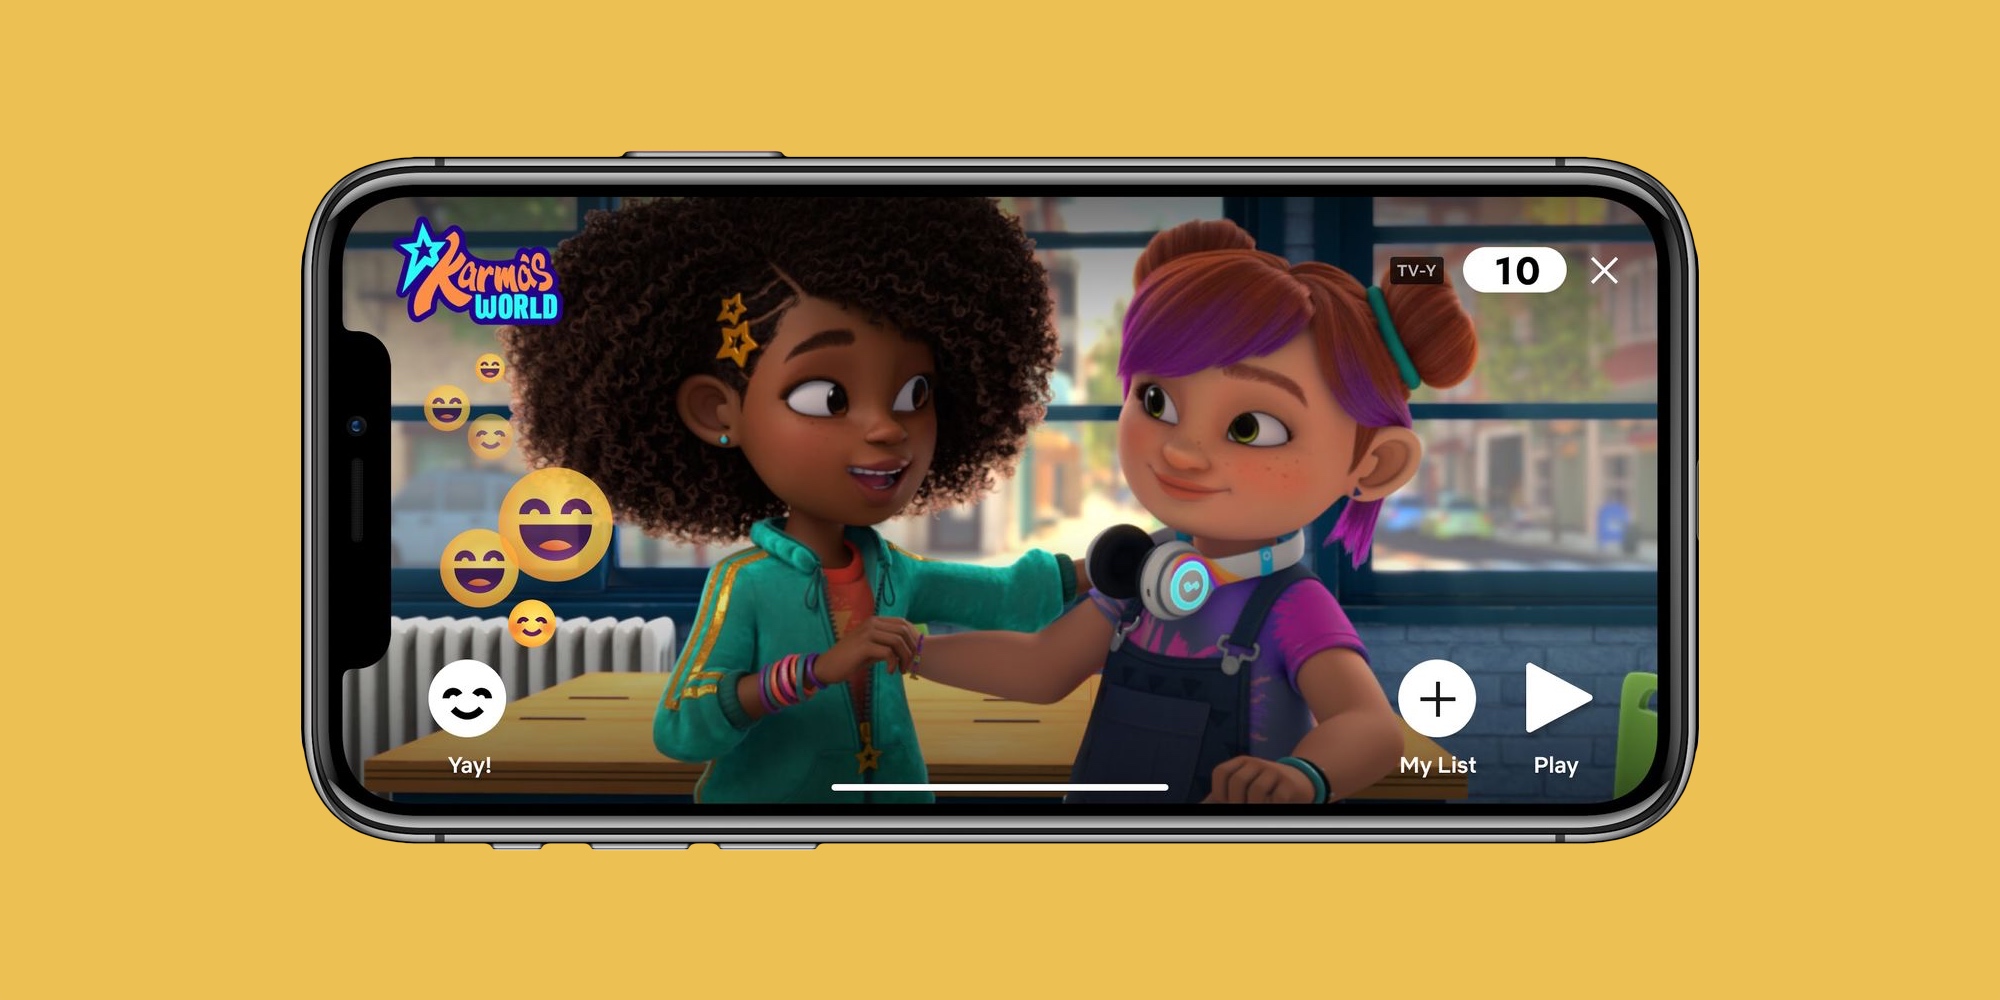 Netflix for iOS to add short clip feature for kids - 9to5Mac